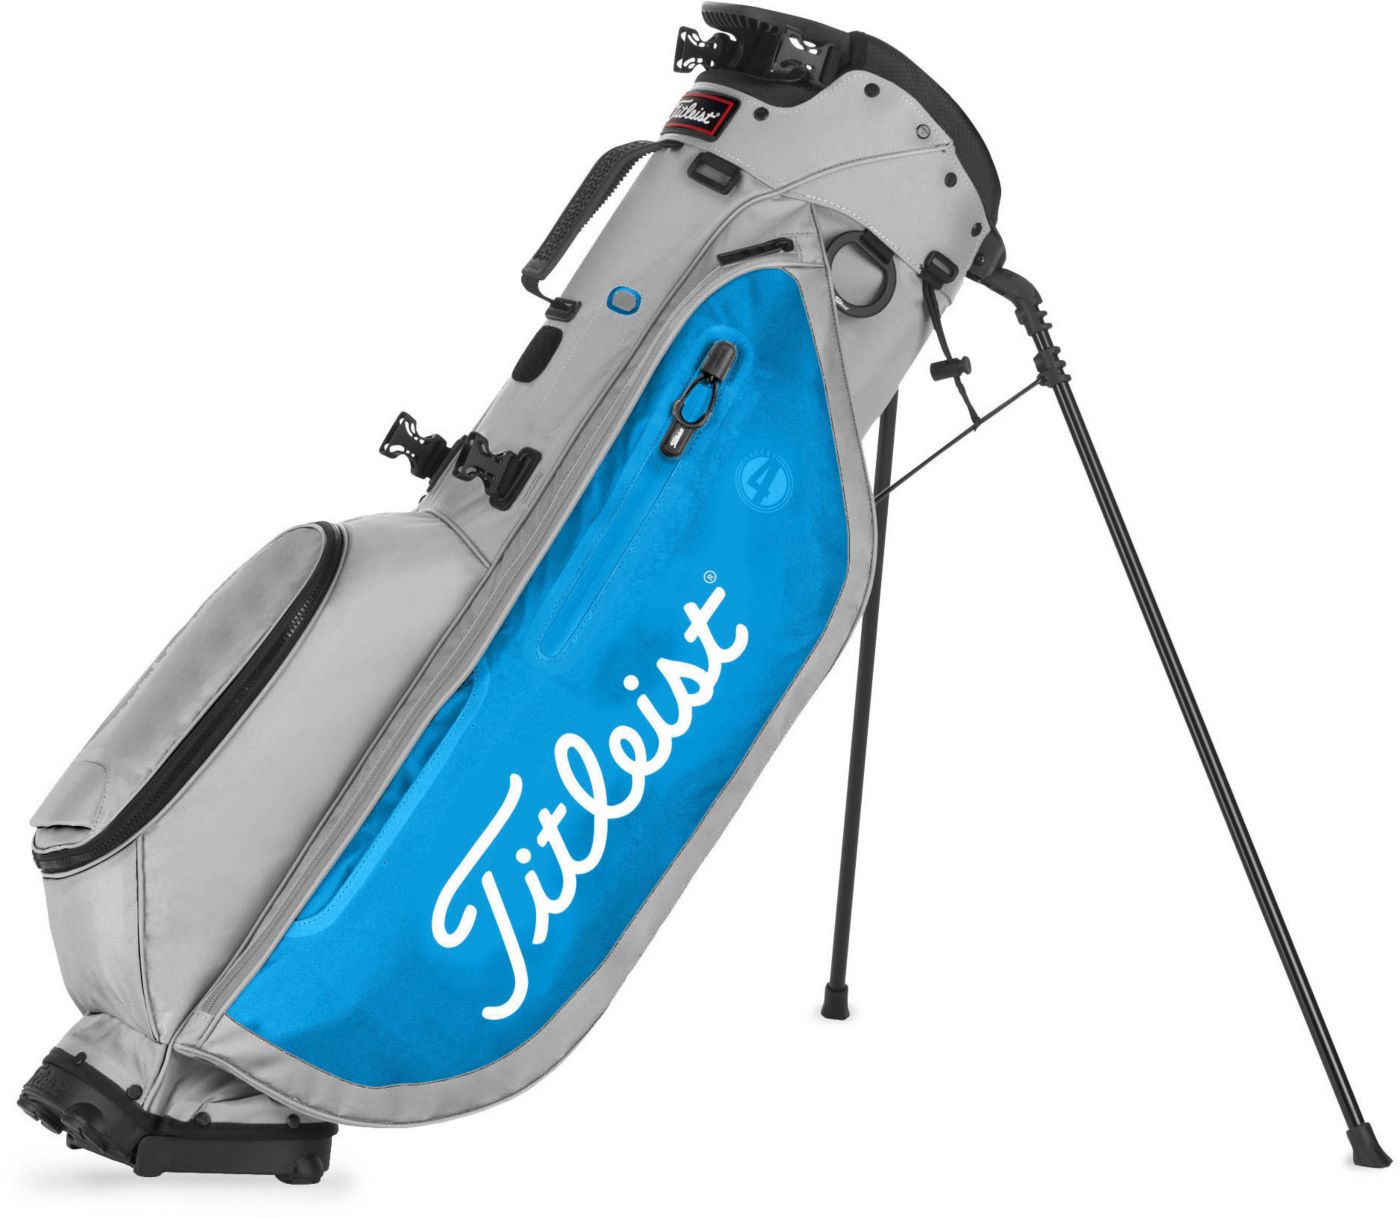 Golf bags Dicks - Price and Deals